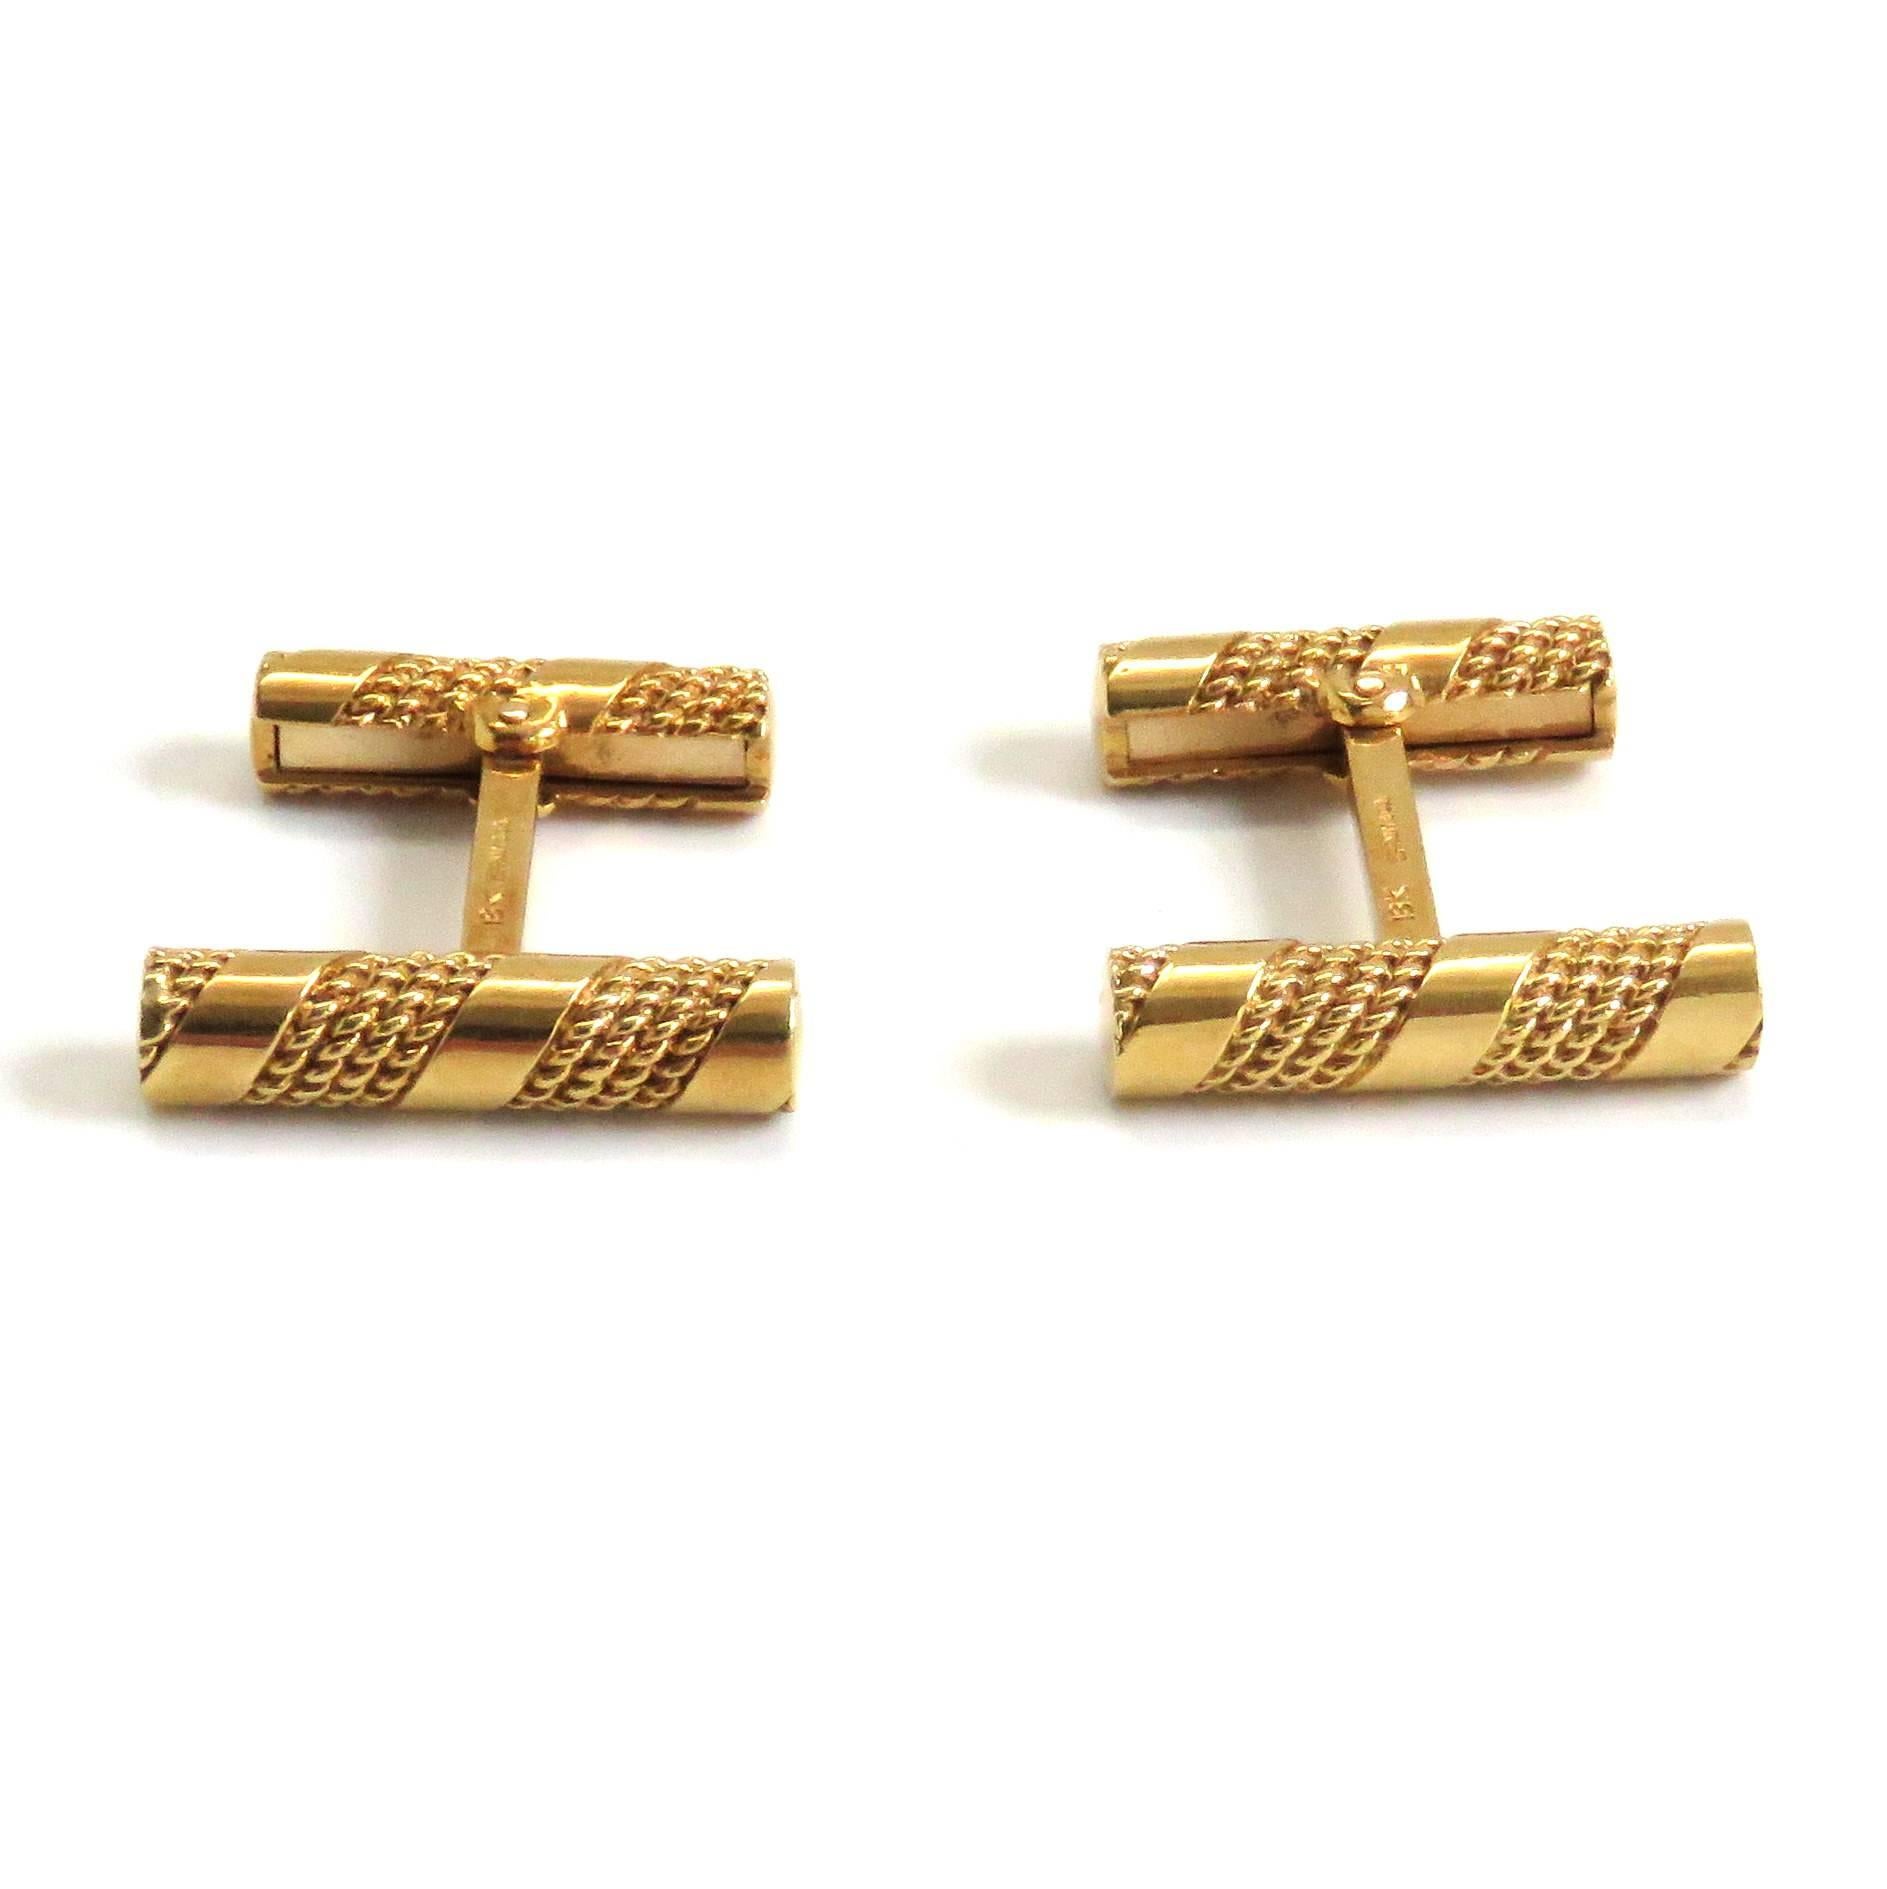 A pair of 18k yellow gold cufflinks by Tiffany & Co.  The cufflinks measure 25mm x 5.5mm and weigh 20.5 grams. Marked: Tiffany & Co, 18k.